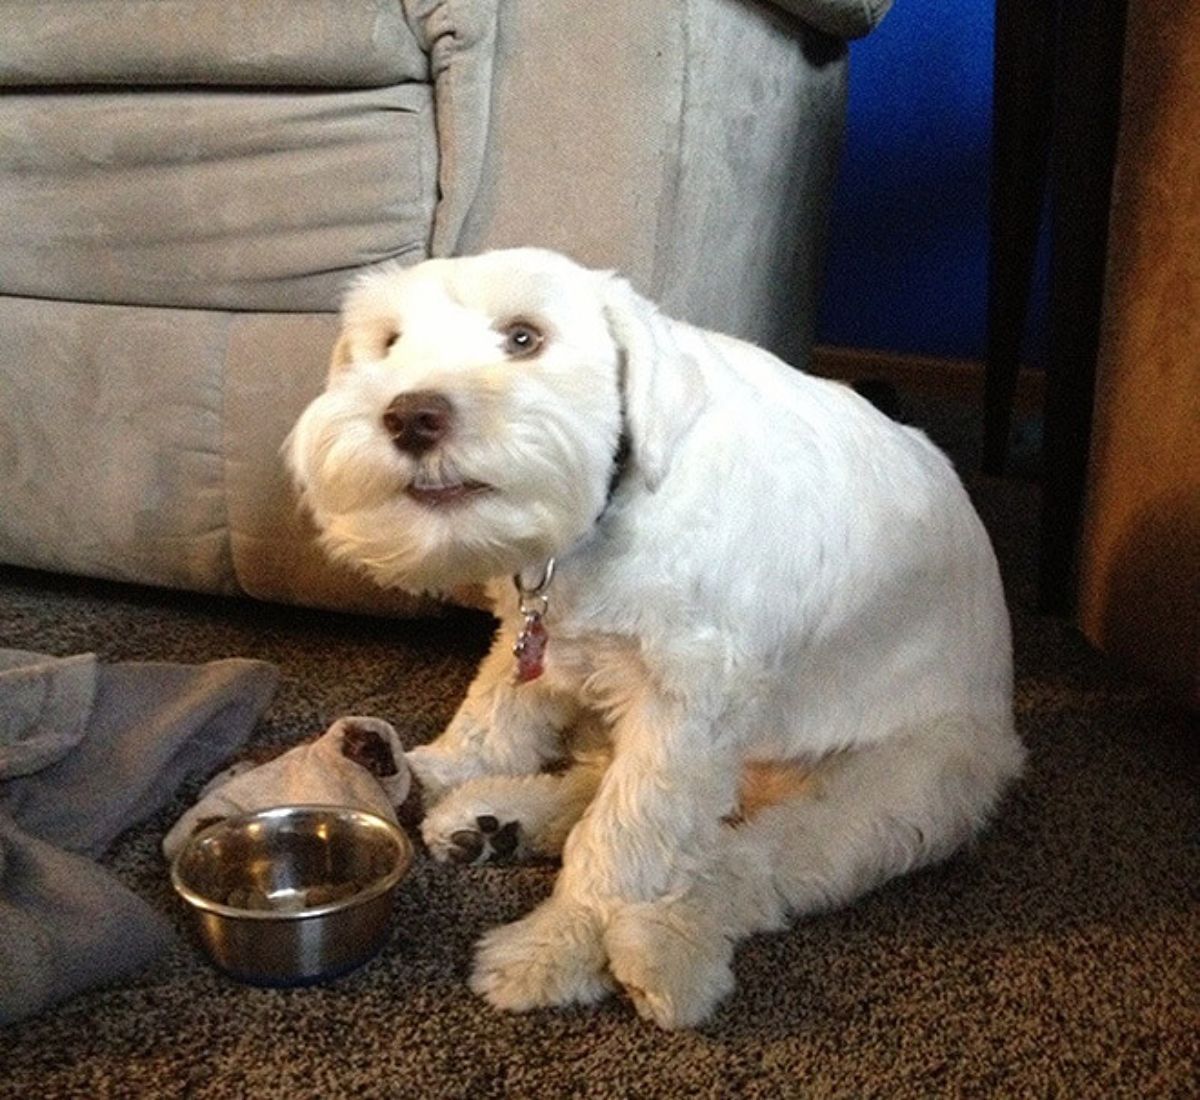 small fluffy white dog sitting on its haunches in front of a small silver food bowl